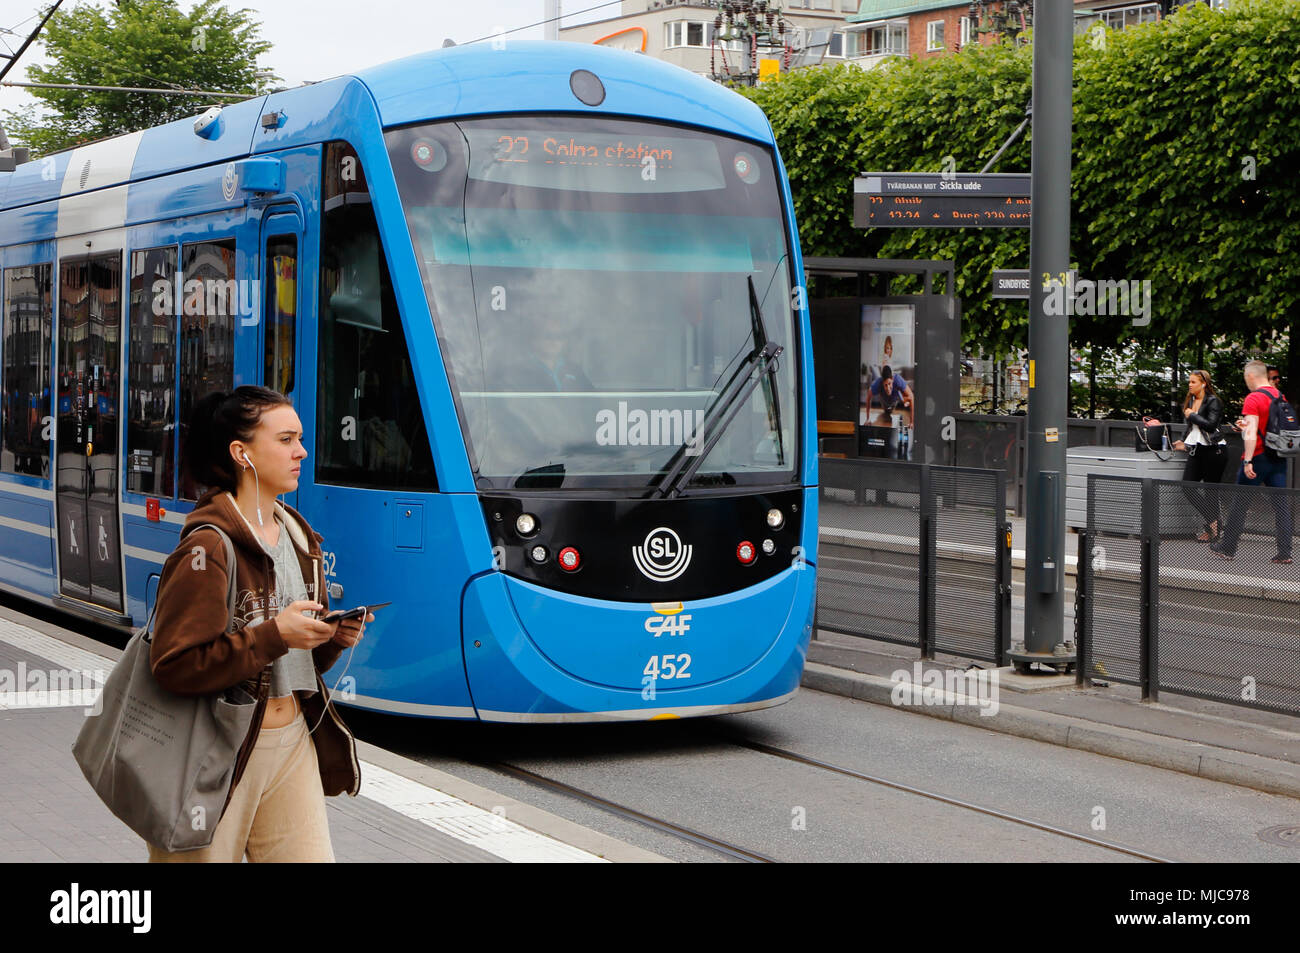 Sundbyberg, Sweden - June 21, 2016: Tram on street tracks in Sunbyberg city center with a woman walking at the tram stop. Stock Photo